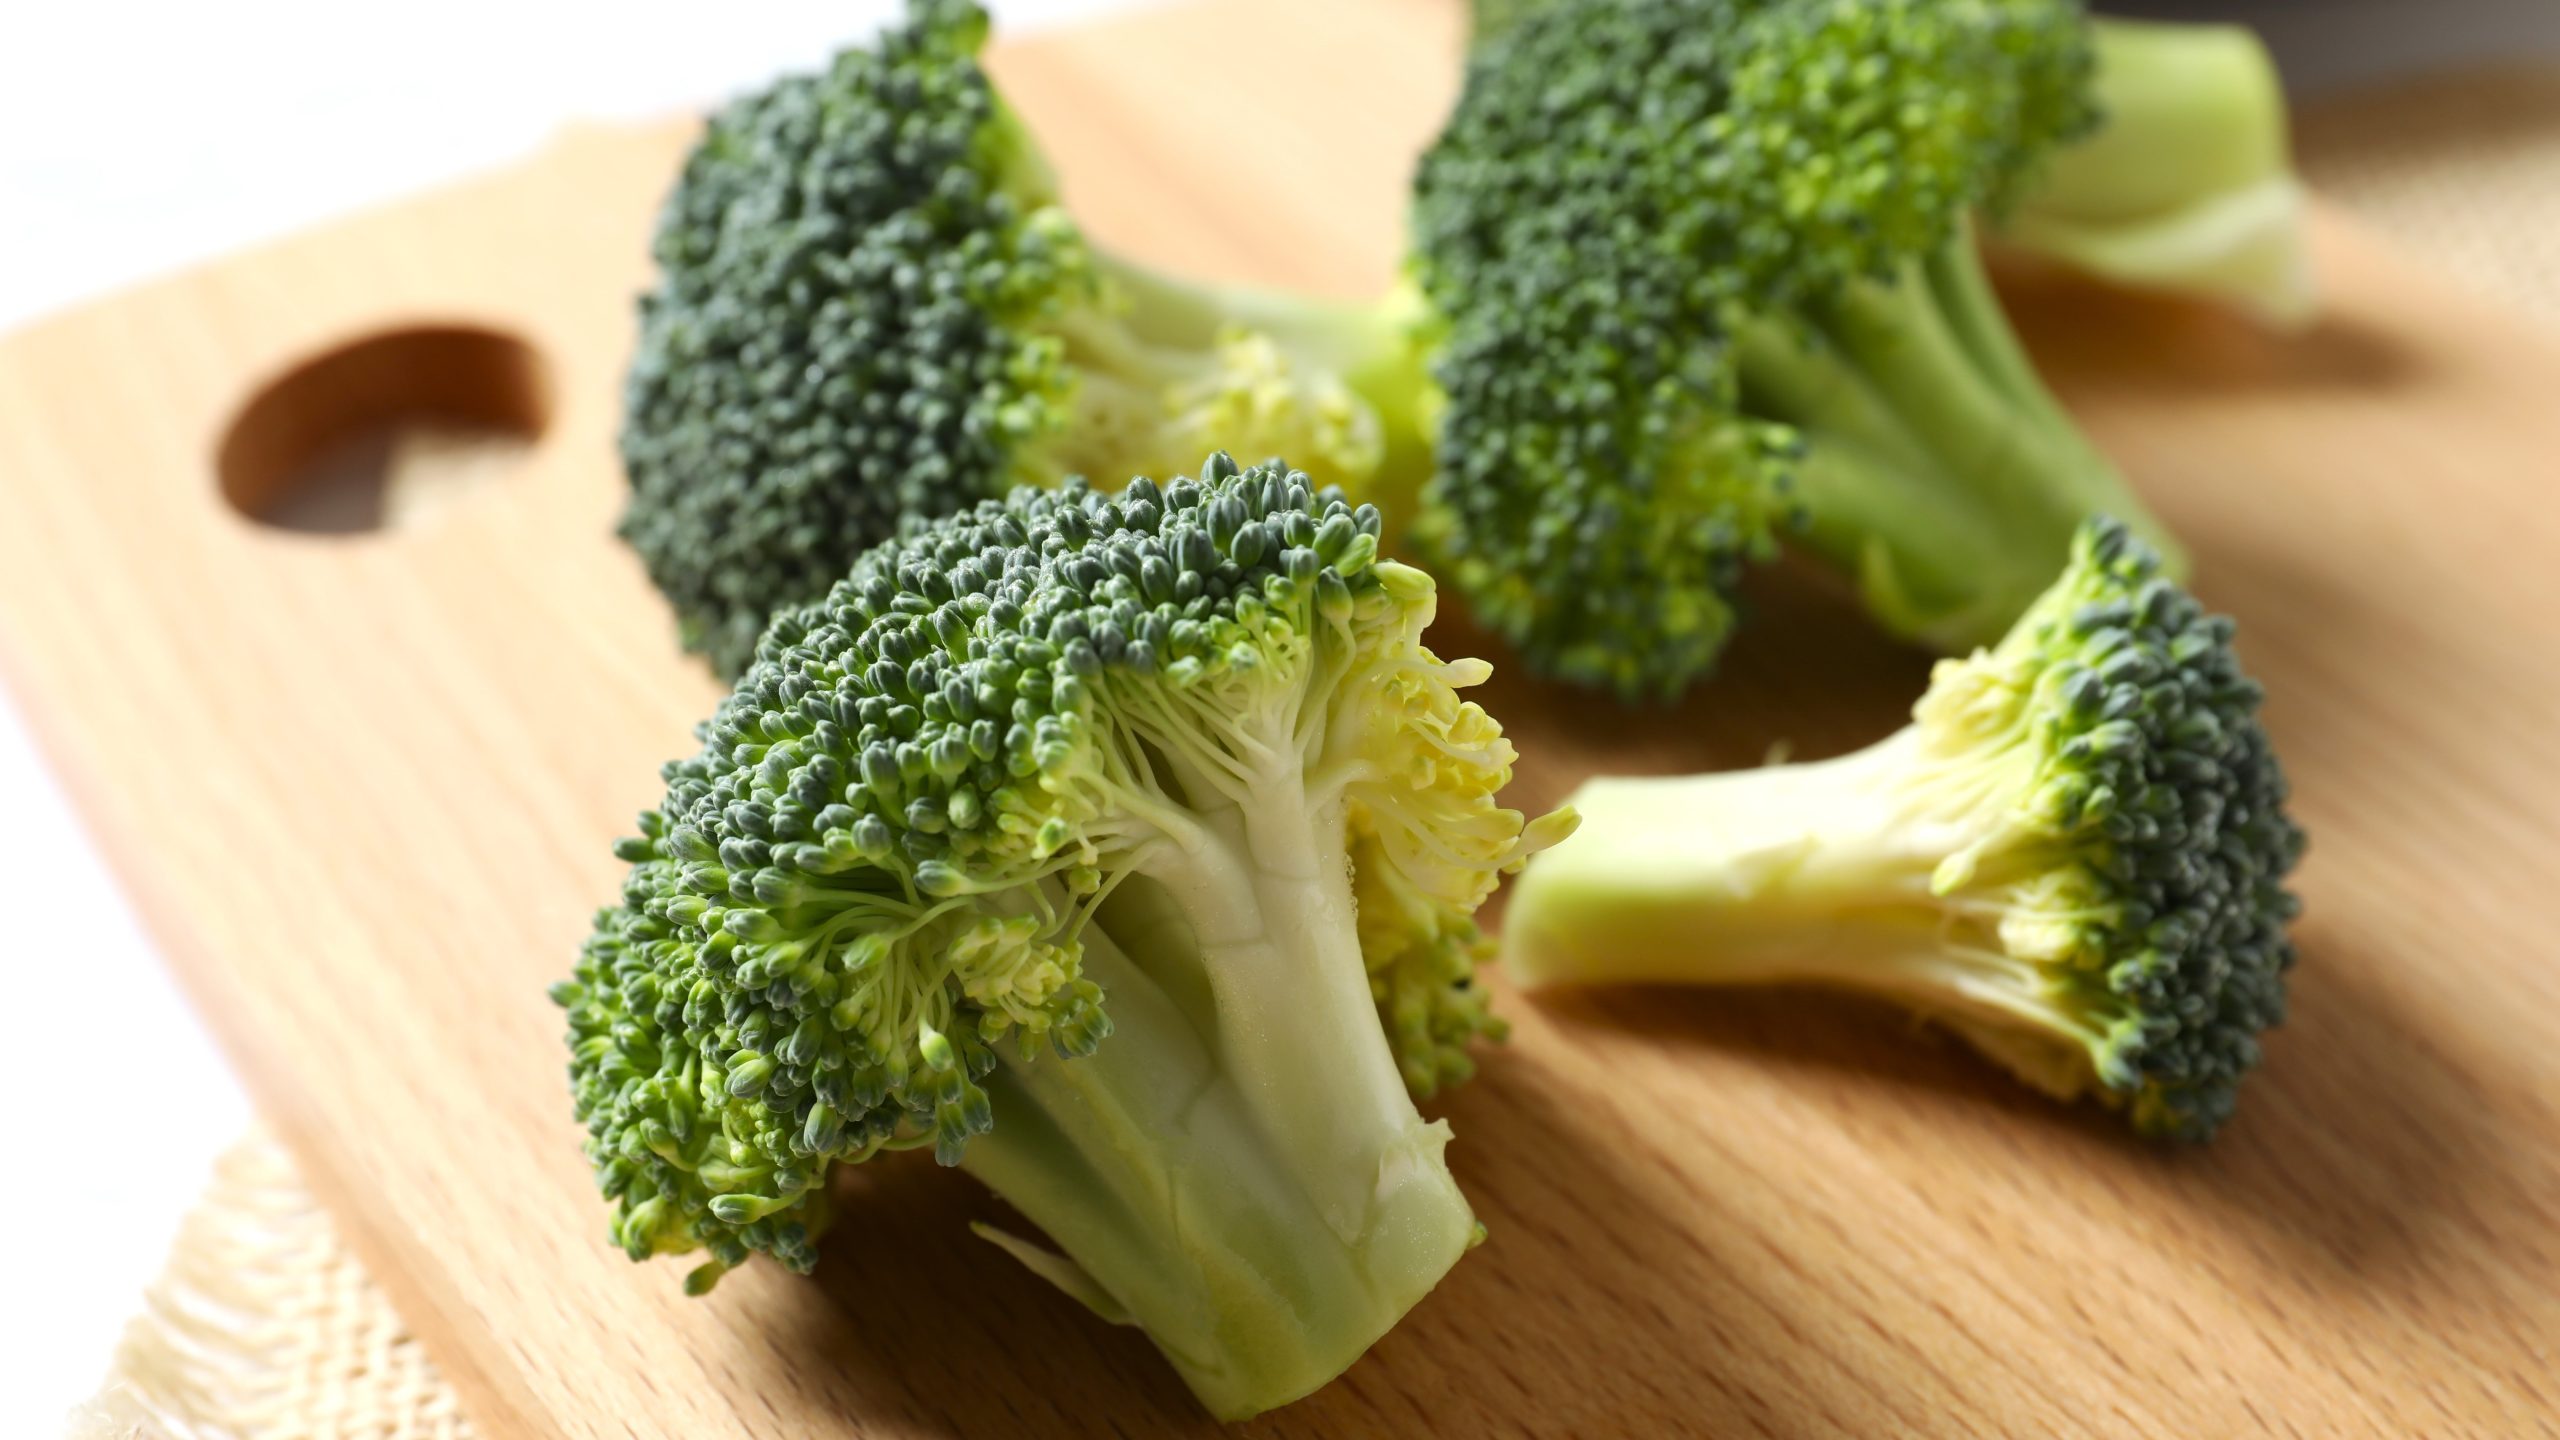 cutting up broccoli to help heal a leaky gut